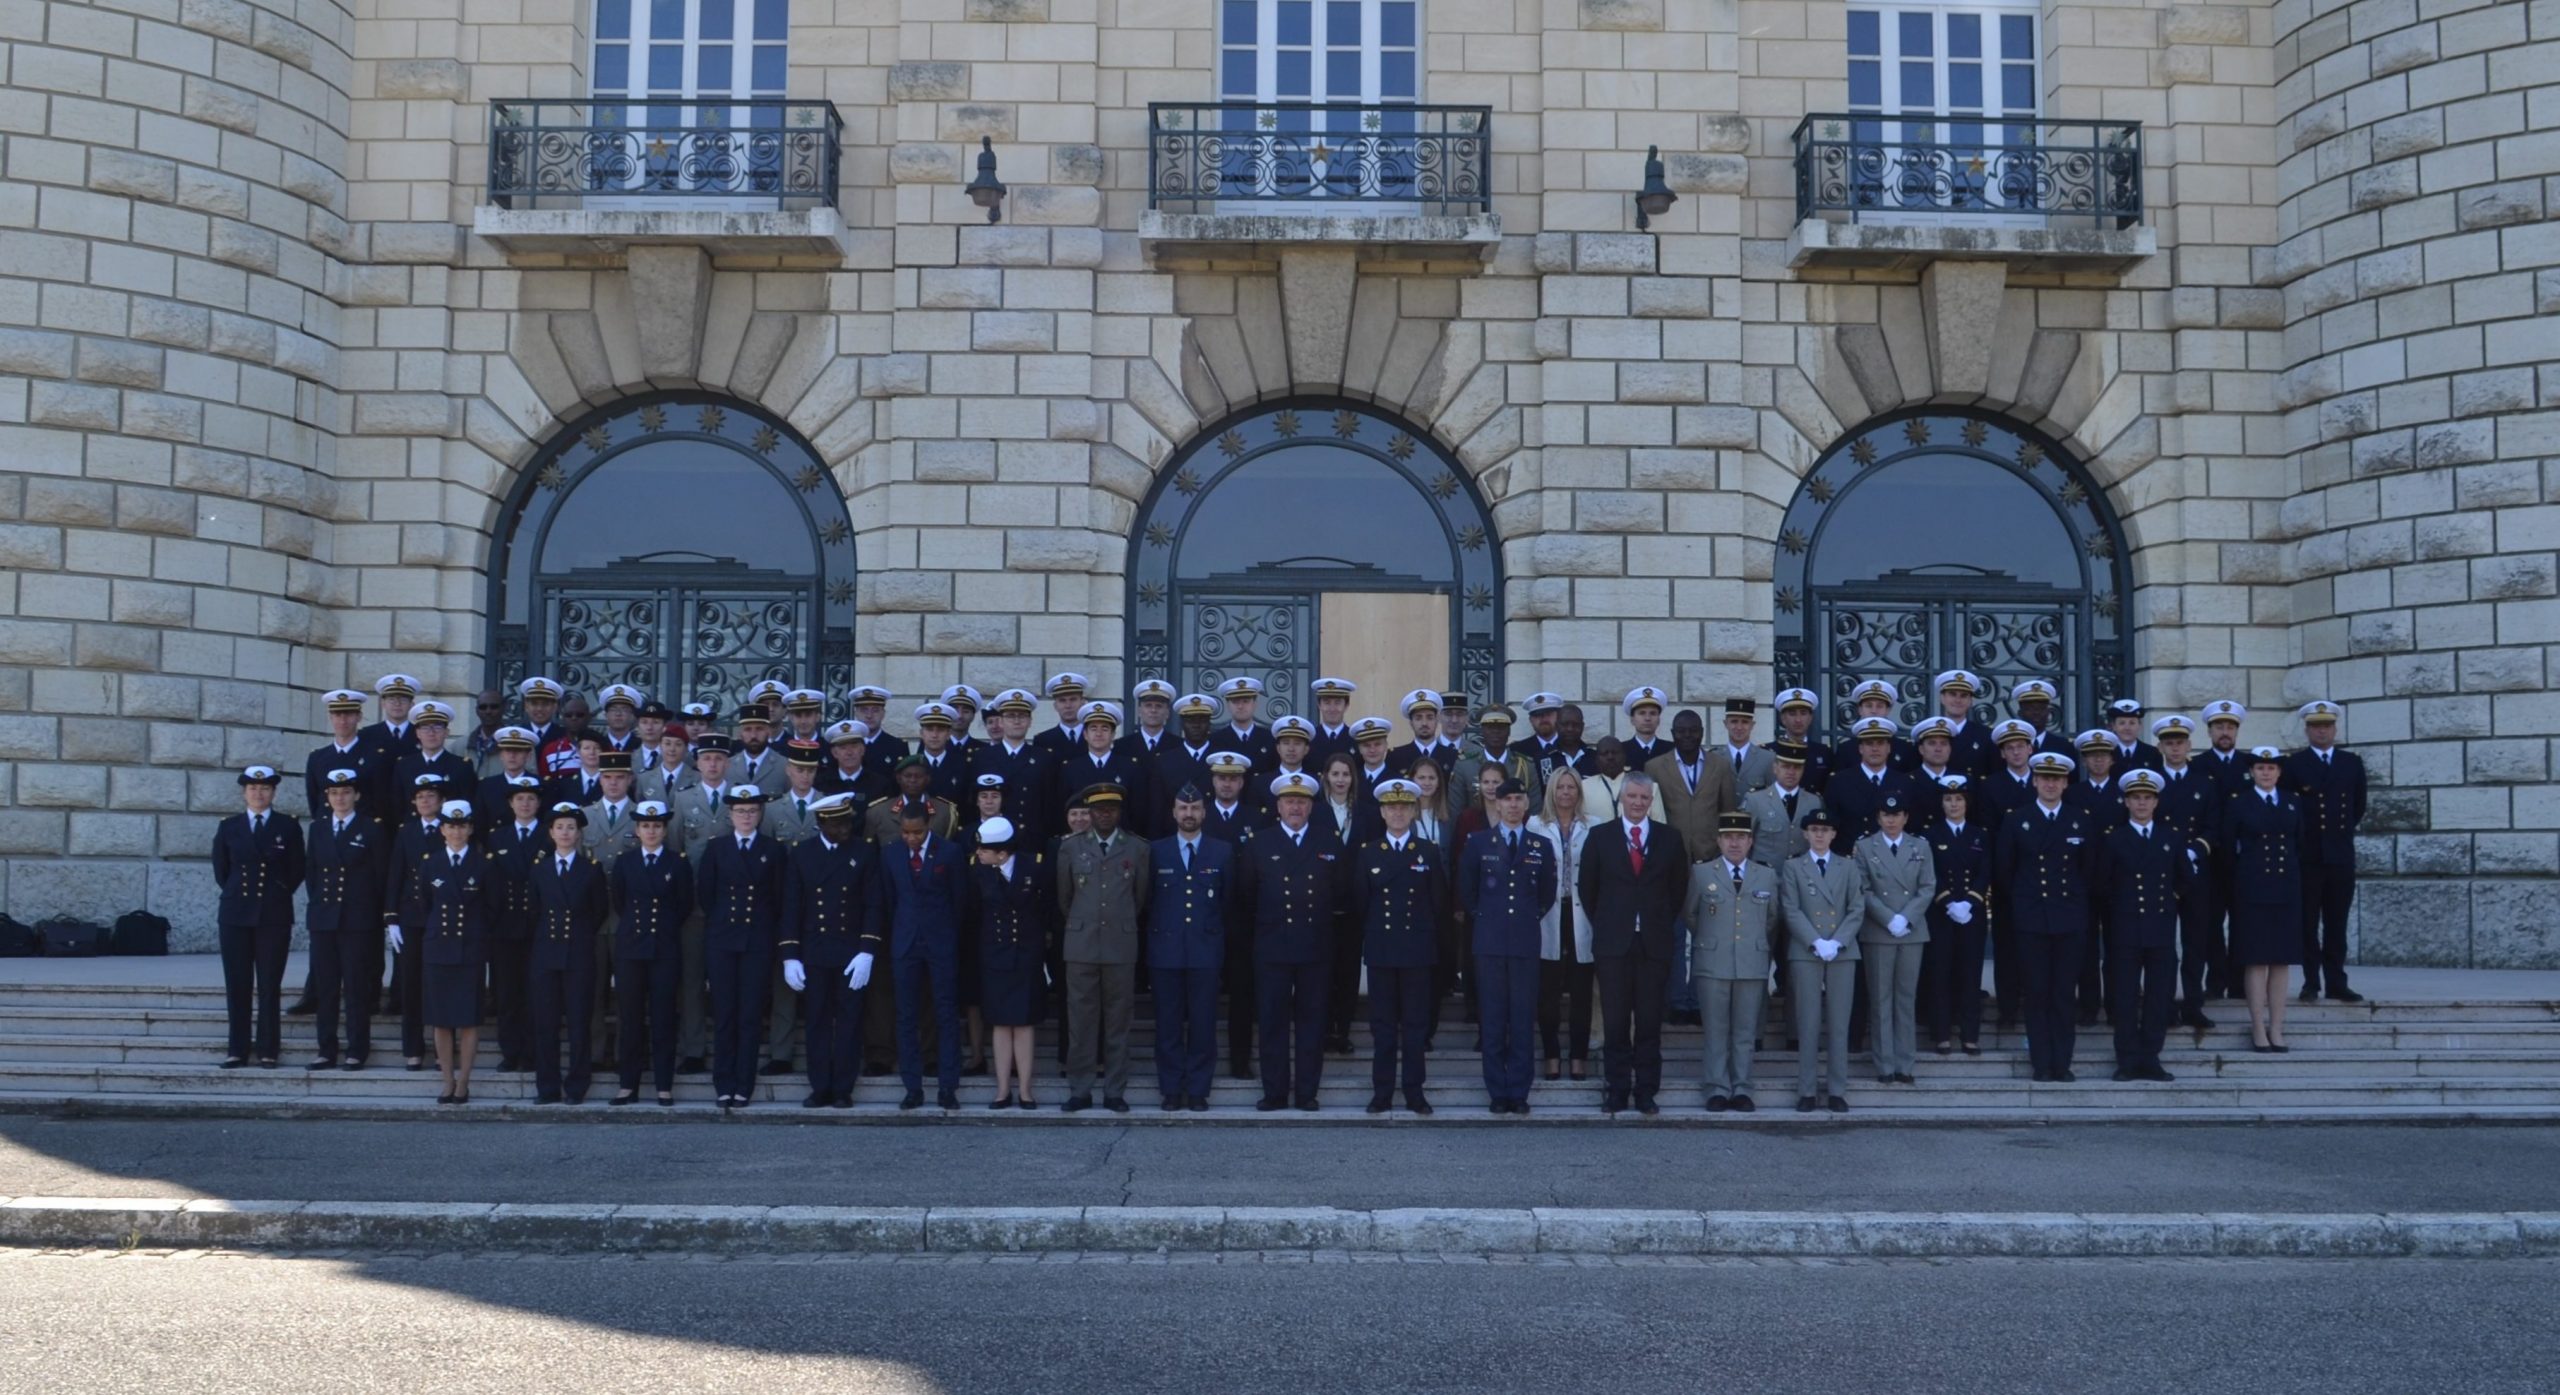 180th International Military Course on LOAC in French – Registration is open